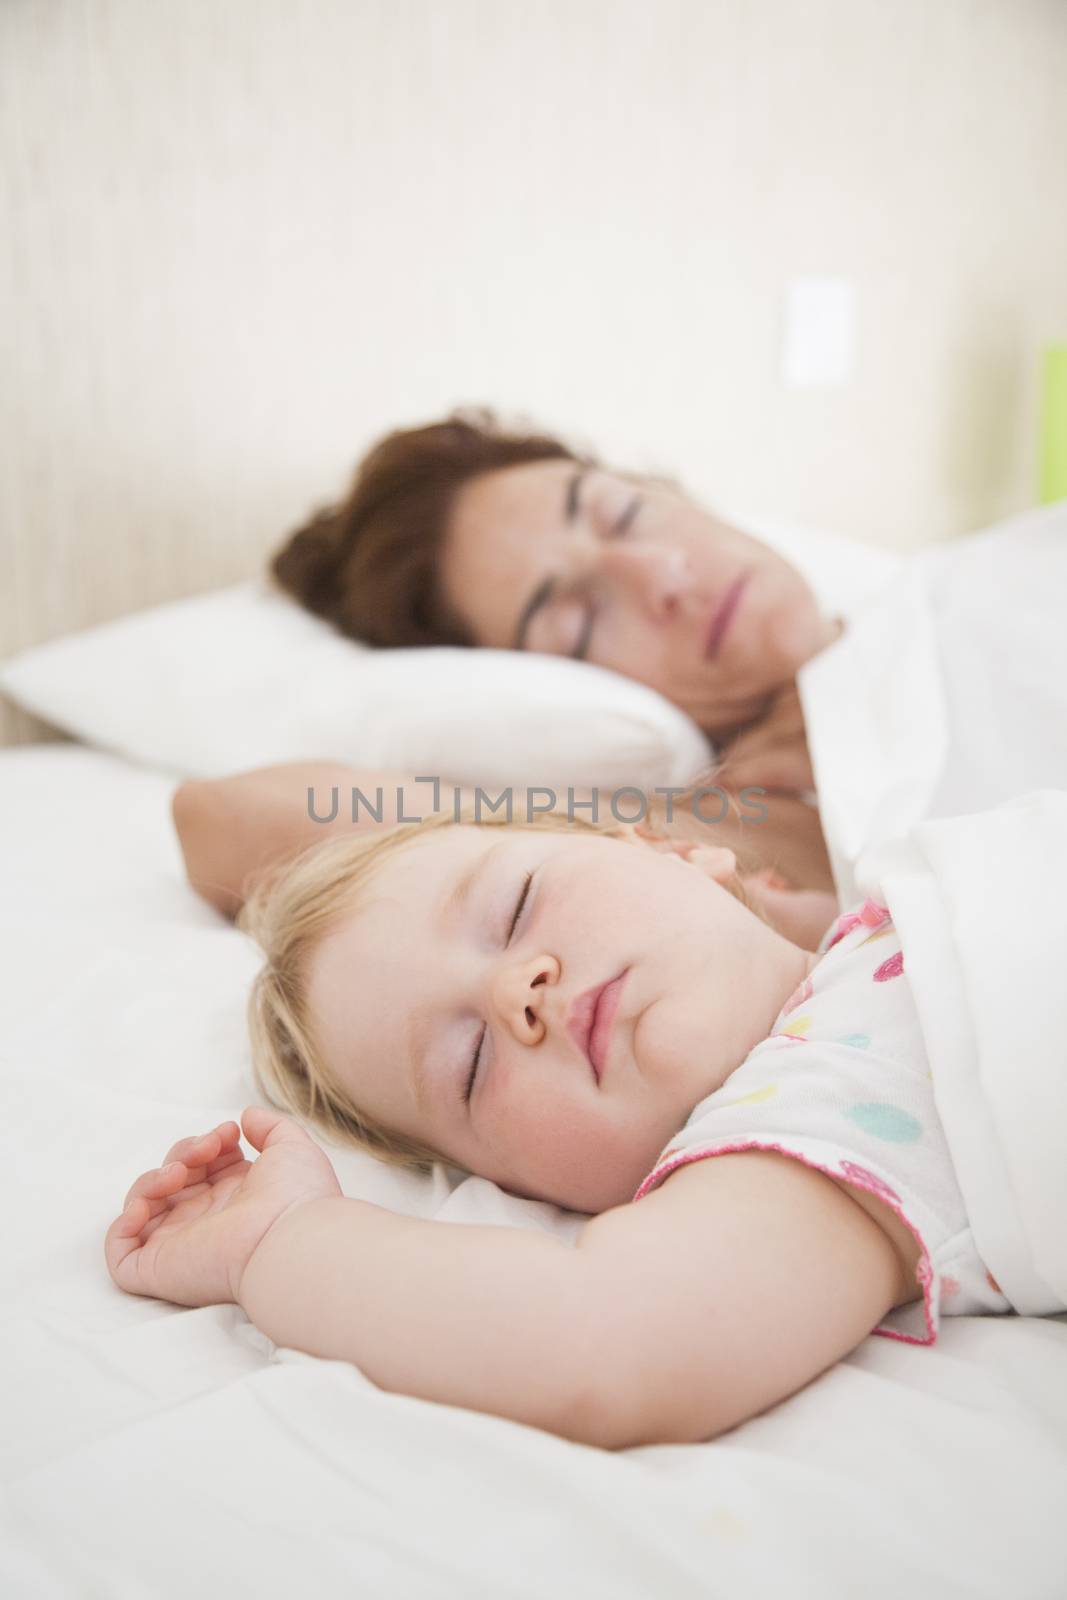 one year baby face and woman mother sleeping dreaming together in white quilt bed